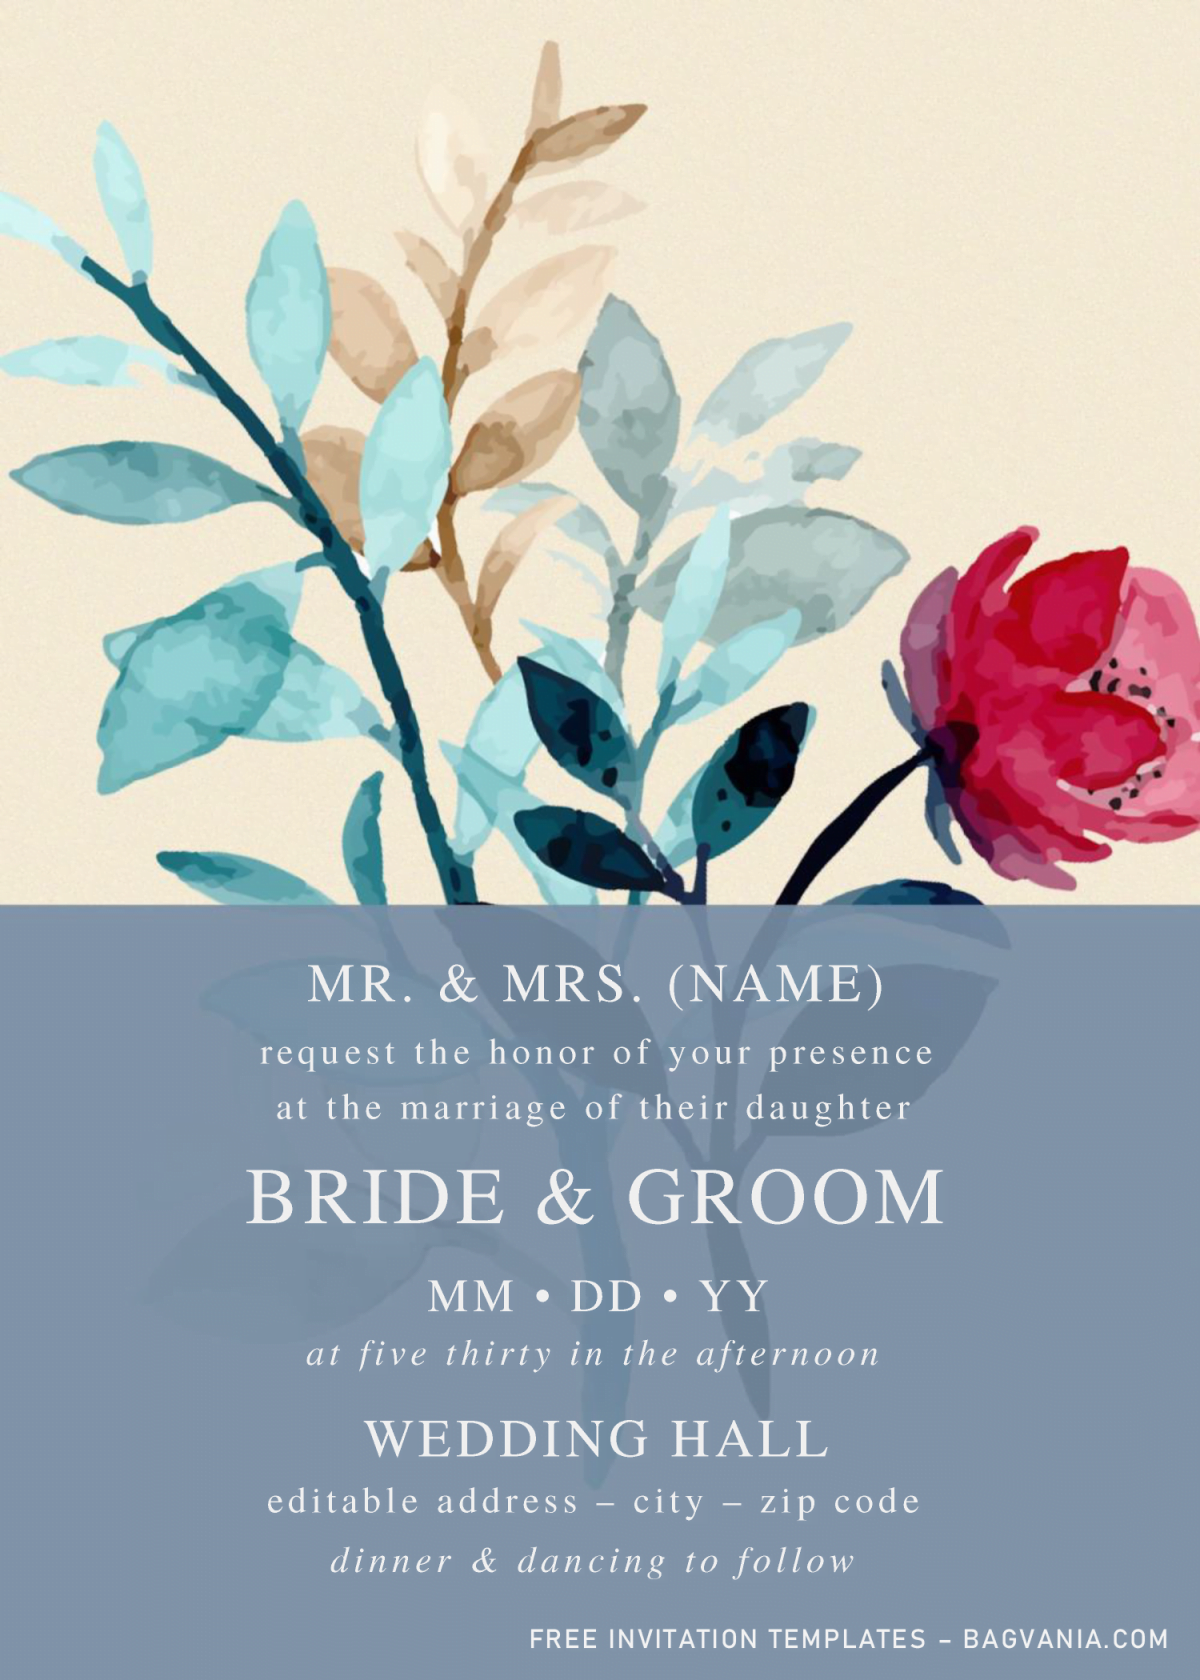 Romantic Spring Invitation Templates - Editable .Docx and has watercolor red rose